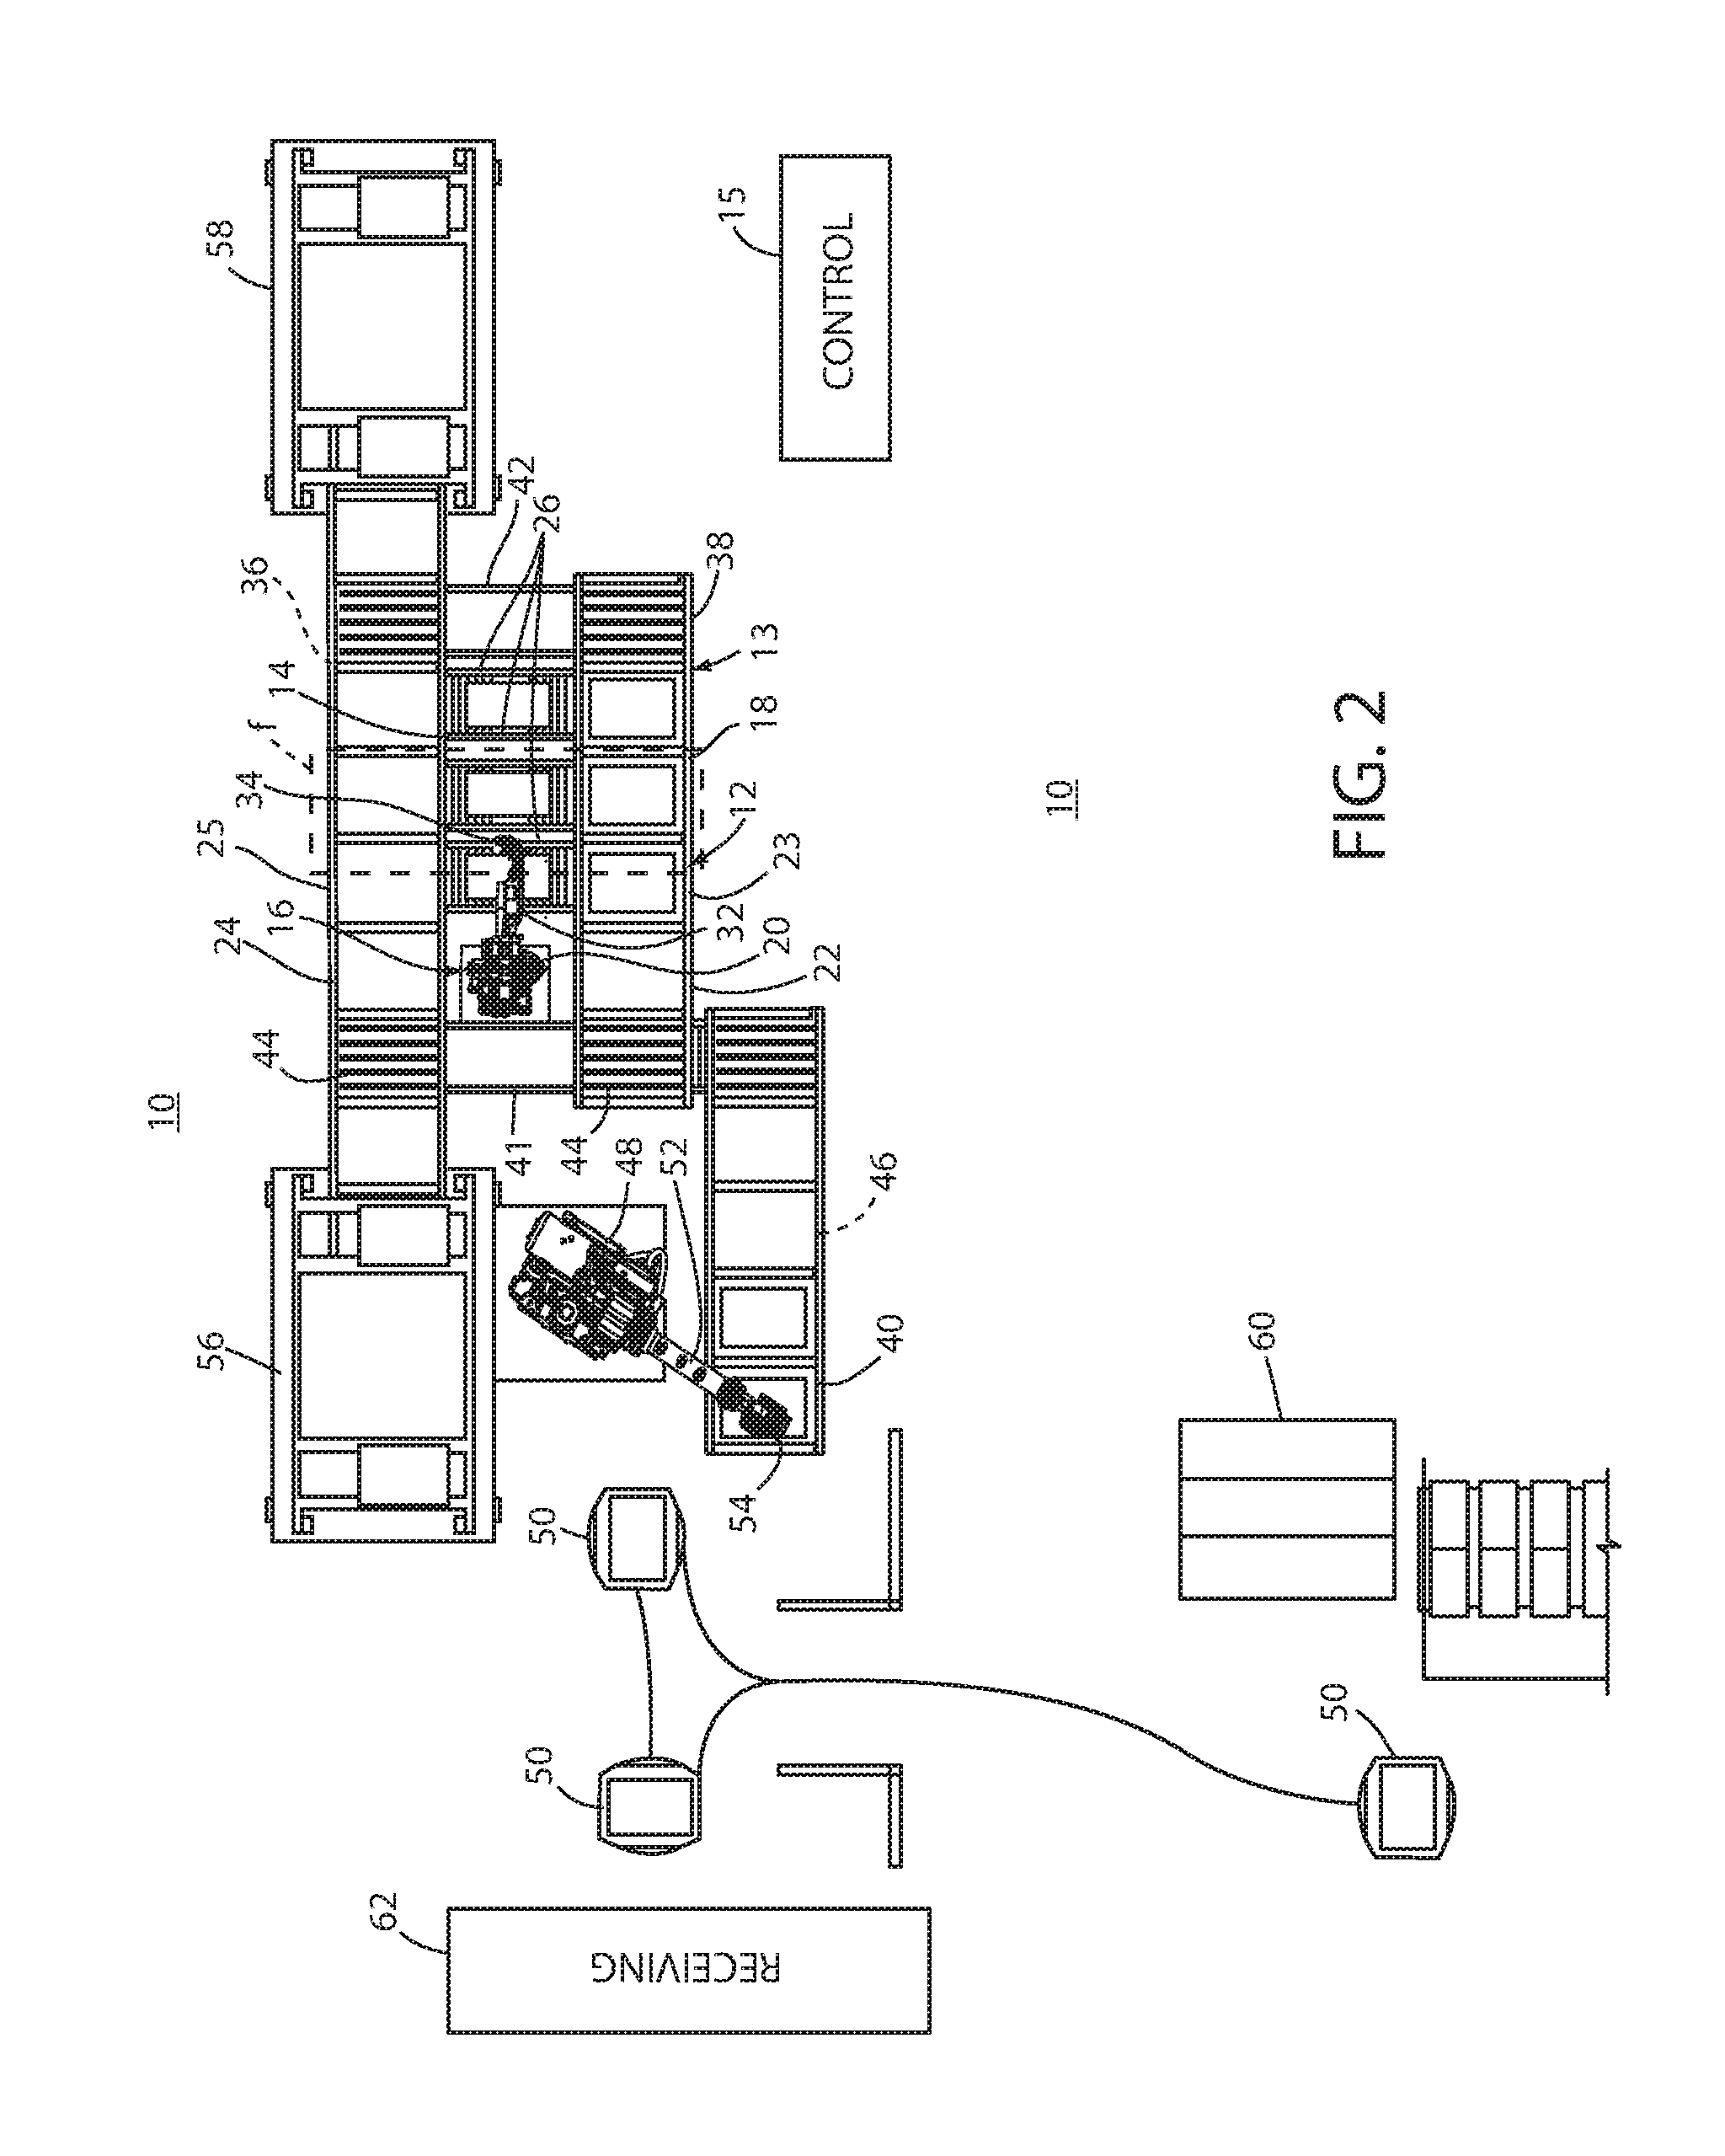 Automated order fulfillment system and method